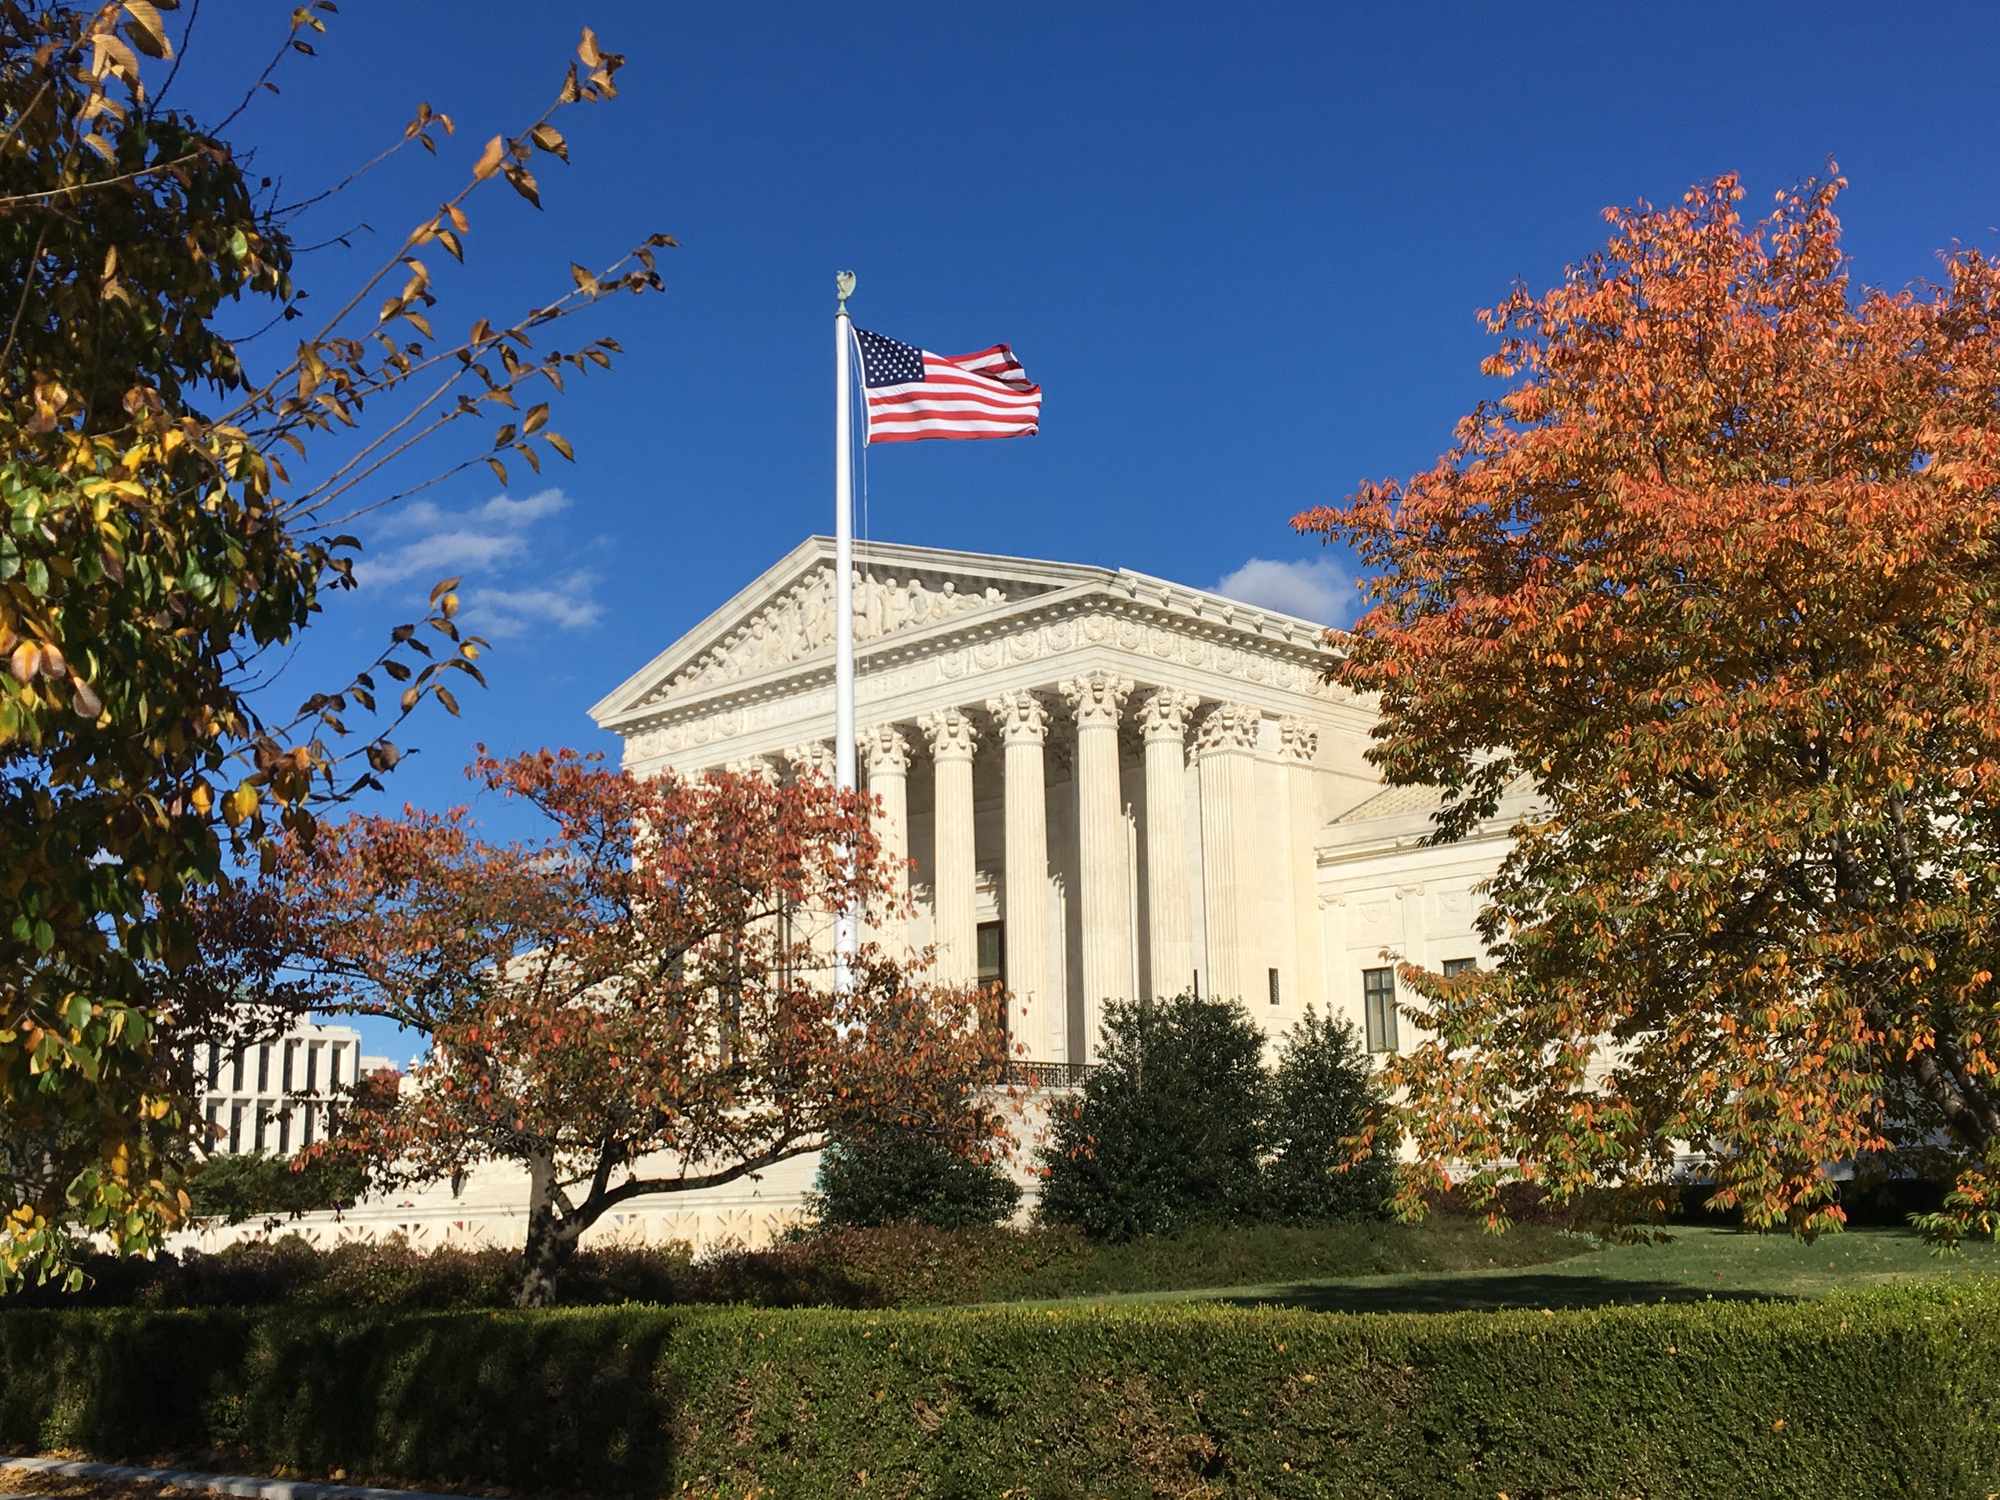 The US Supreme Court building. In the last two weeks, they have overturned the Roe v Wade ruling on abortion rights and hamstrung the President's ability to tackle power plant pollution.